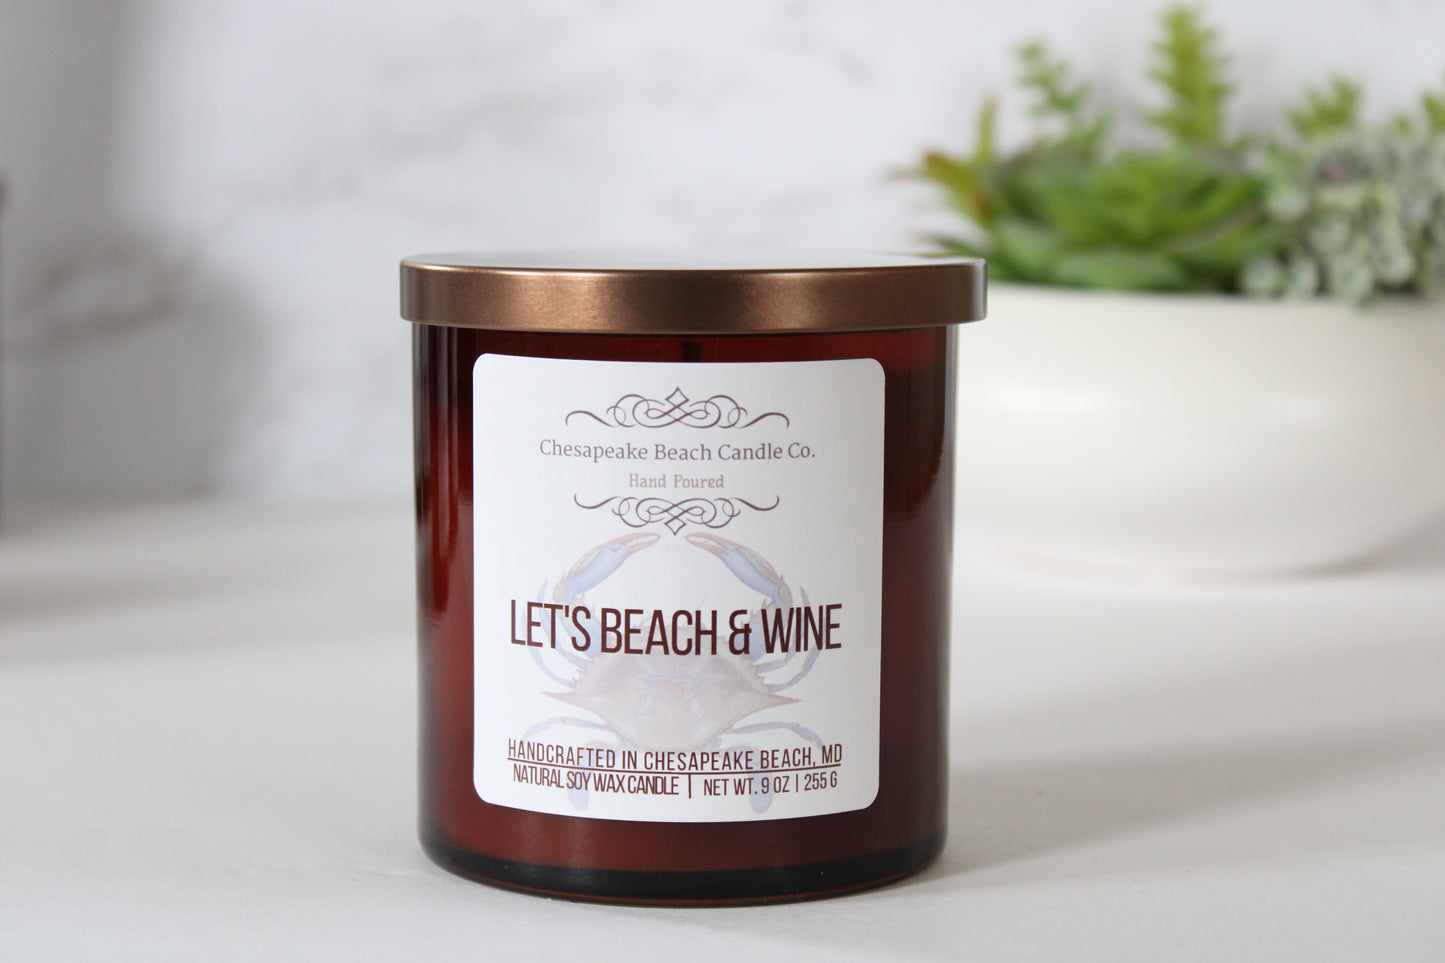 Let's Beach & Wine Candle (9 oz)